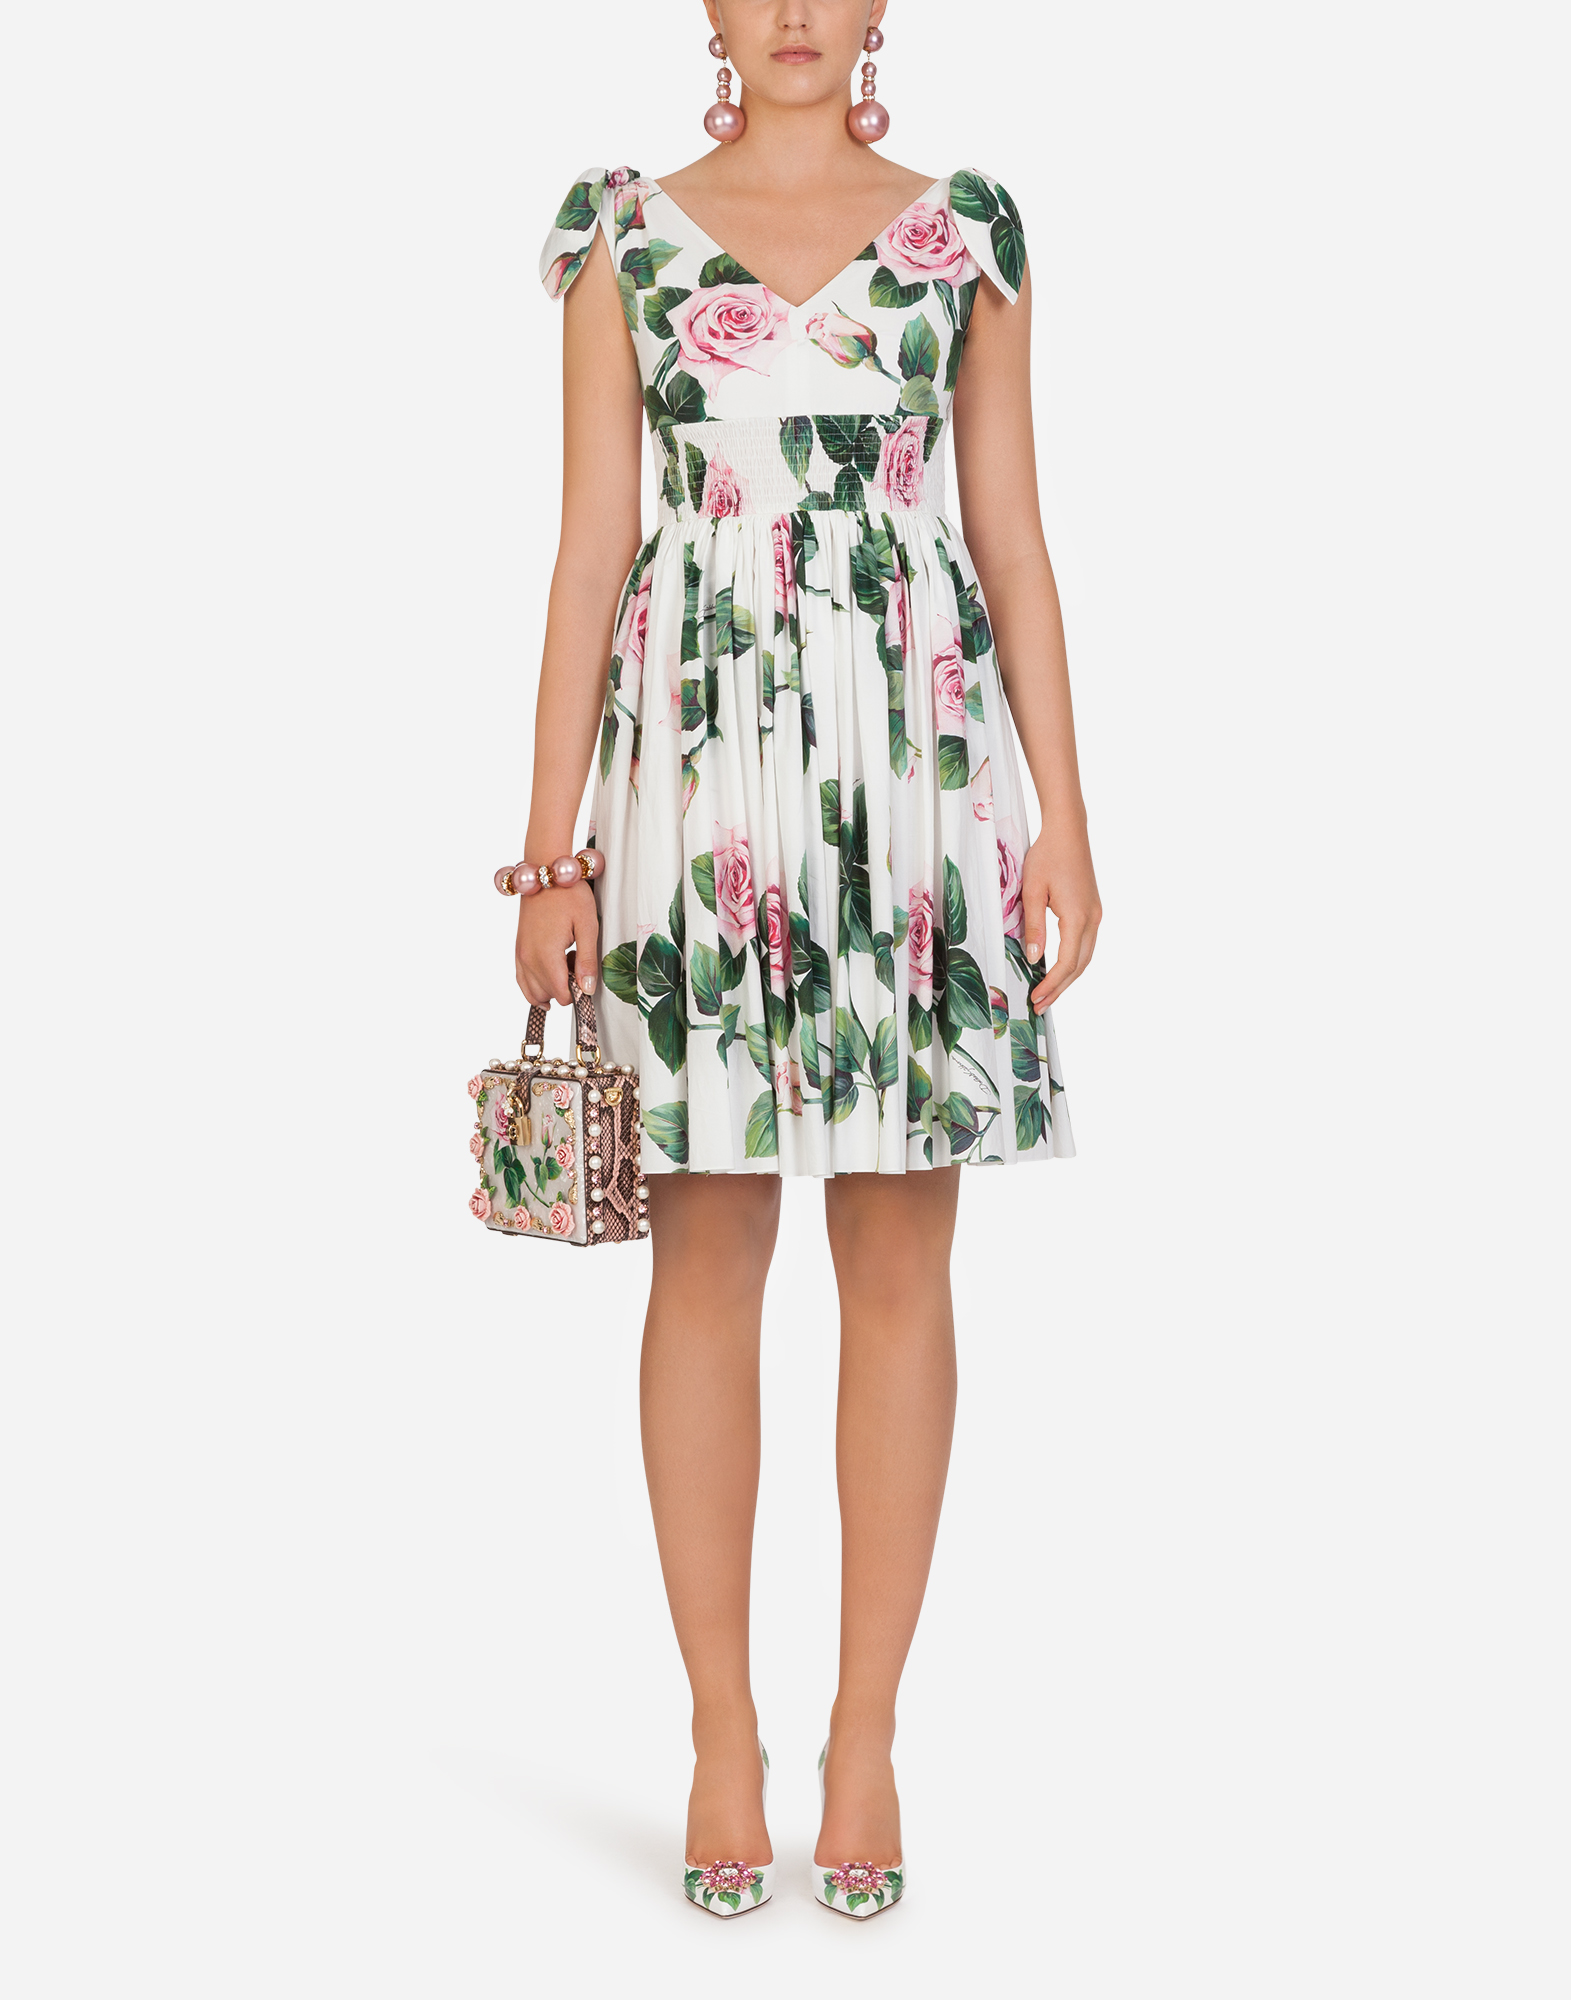 First Off Dolce And Gabbana Sale Online, 56% OFF | www 